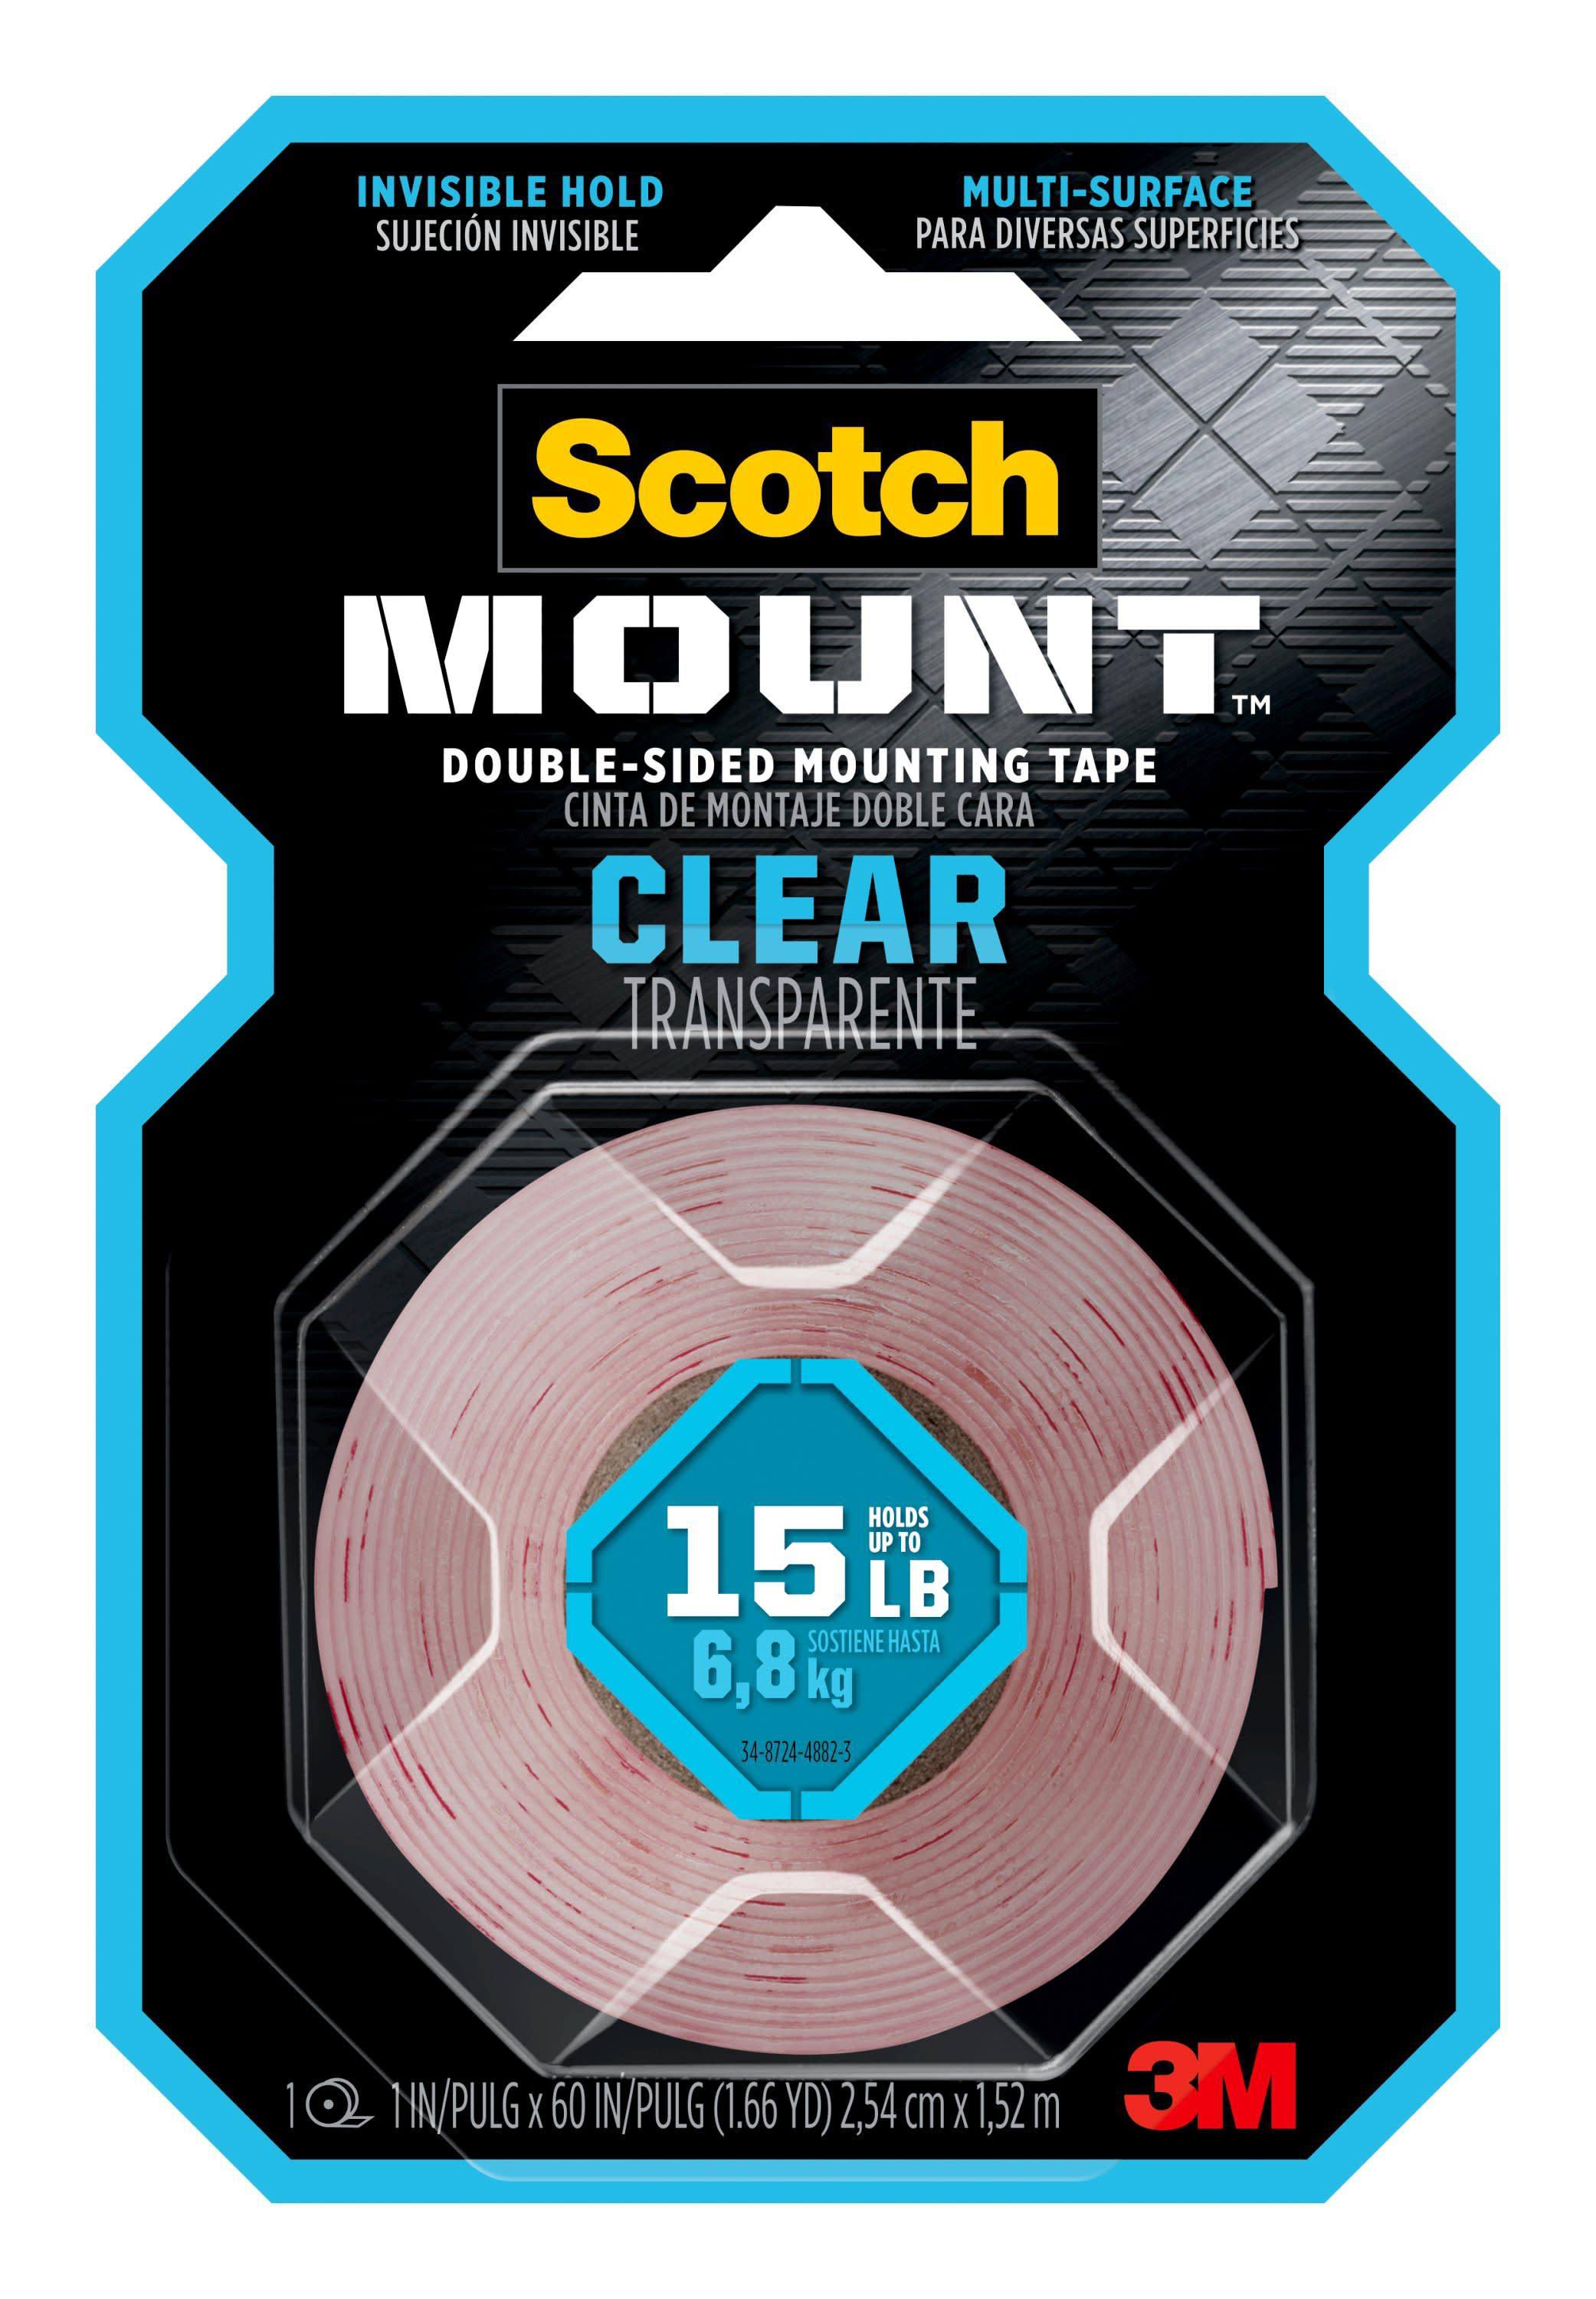 Scotch Mount Mountaing Tape, Double-Sided, Clear